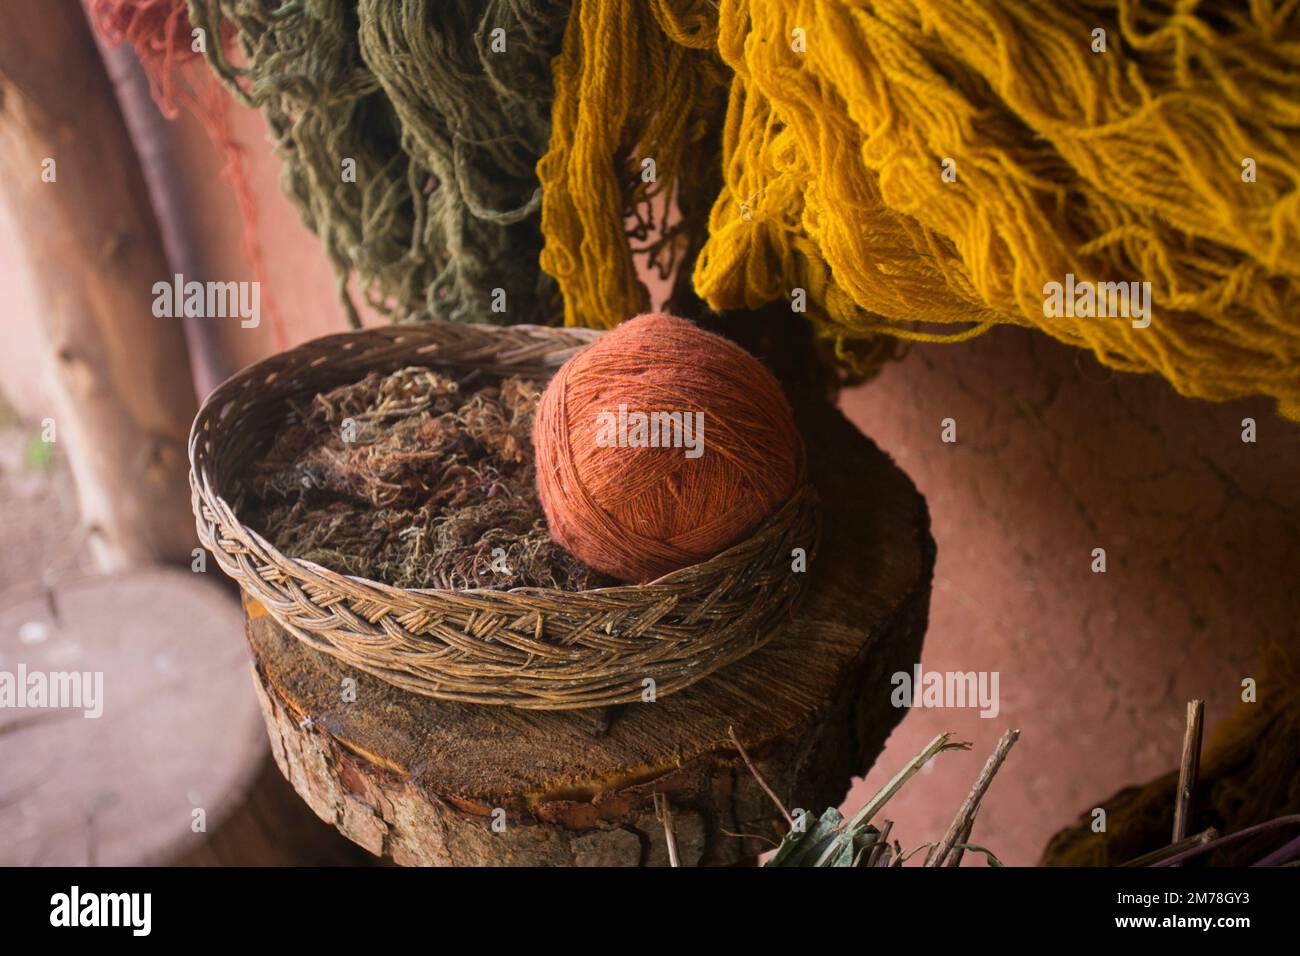 Material for the production of textile crafts in an indigenous community in Peru. Stock Photo